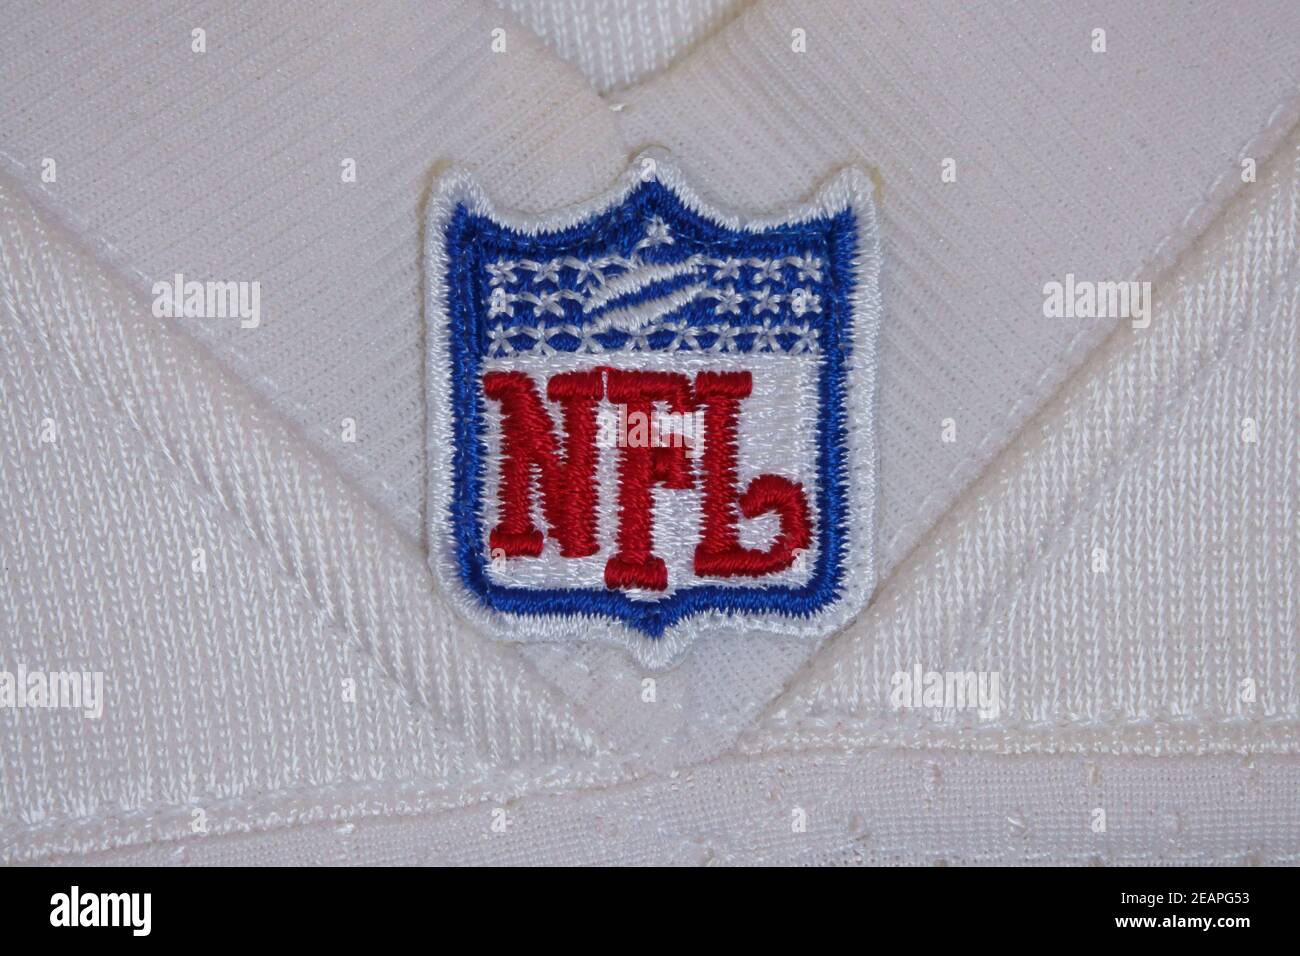 USA / Jan. 4, 2021: A National Football League NFL shield logo patch is shown sewn on an official, white jersey. For editorial uses only. Stock Photo